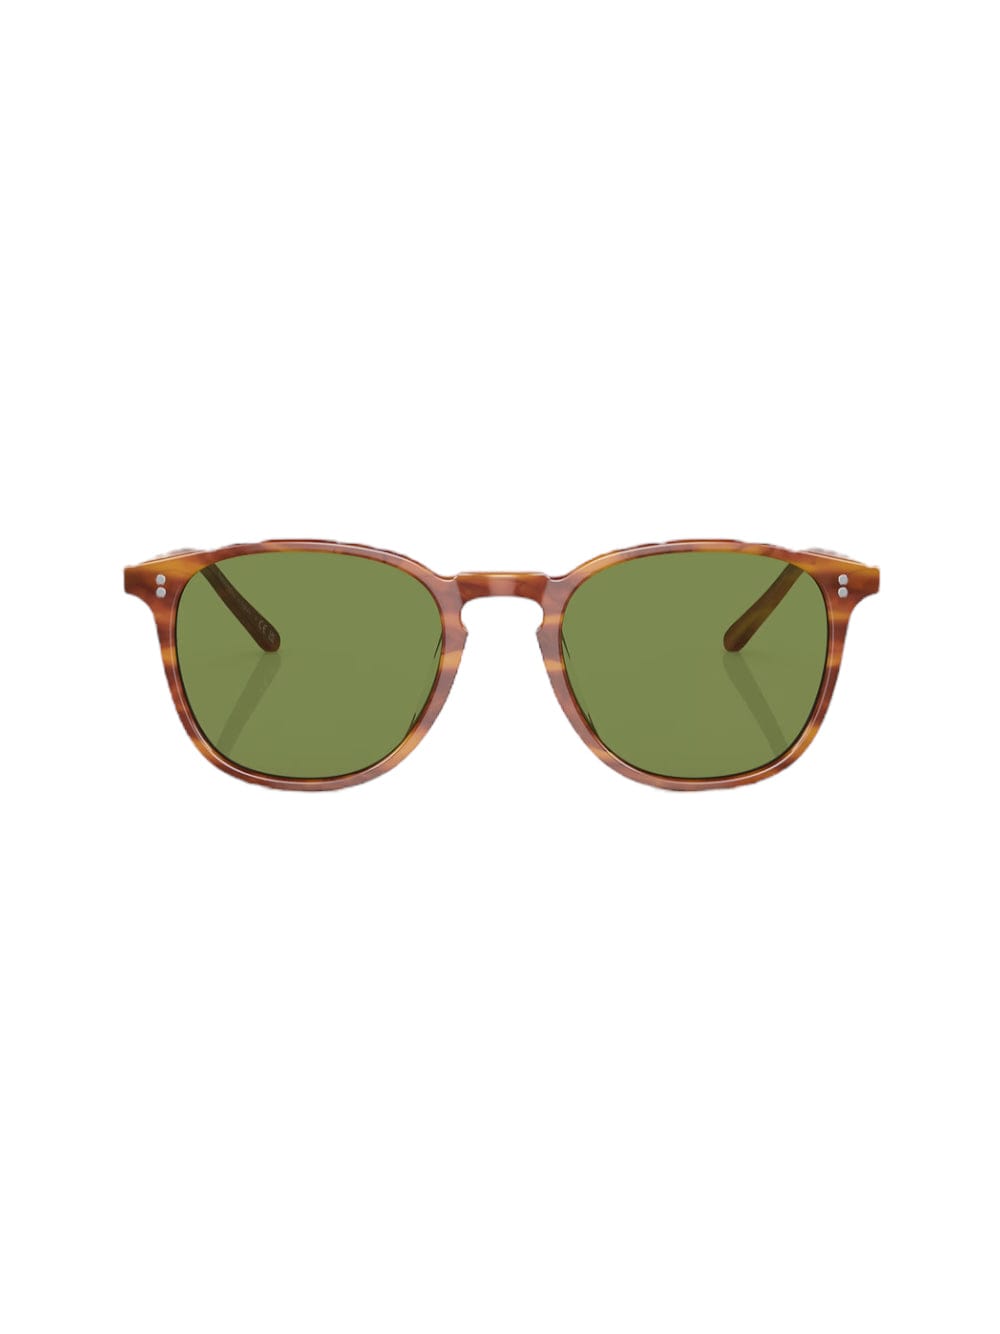 Shop Oliver Peoples Finley Sun 1993 Sunglasses